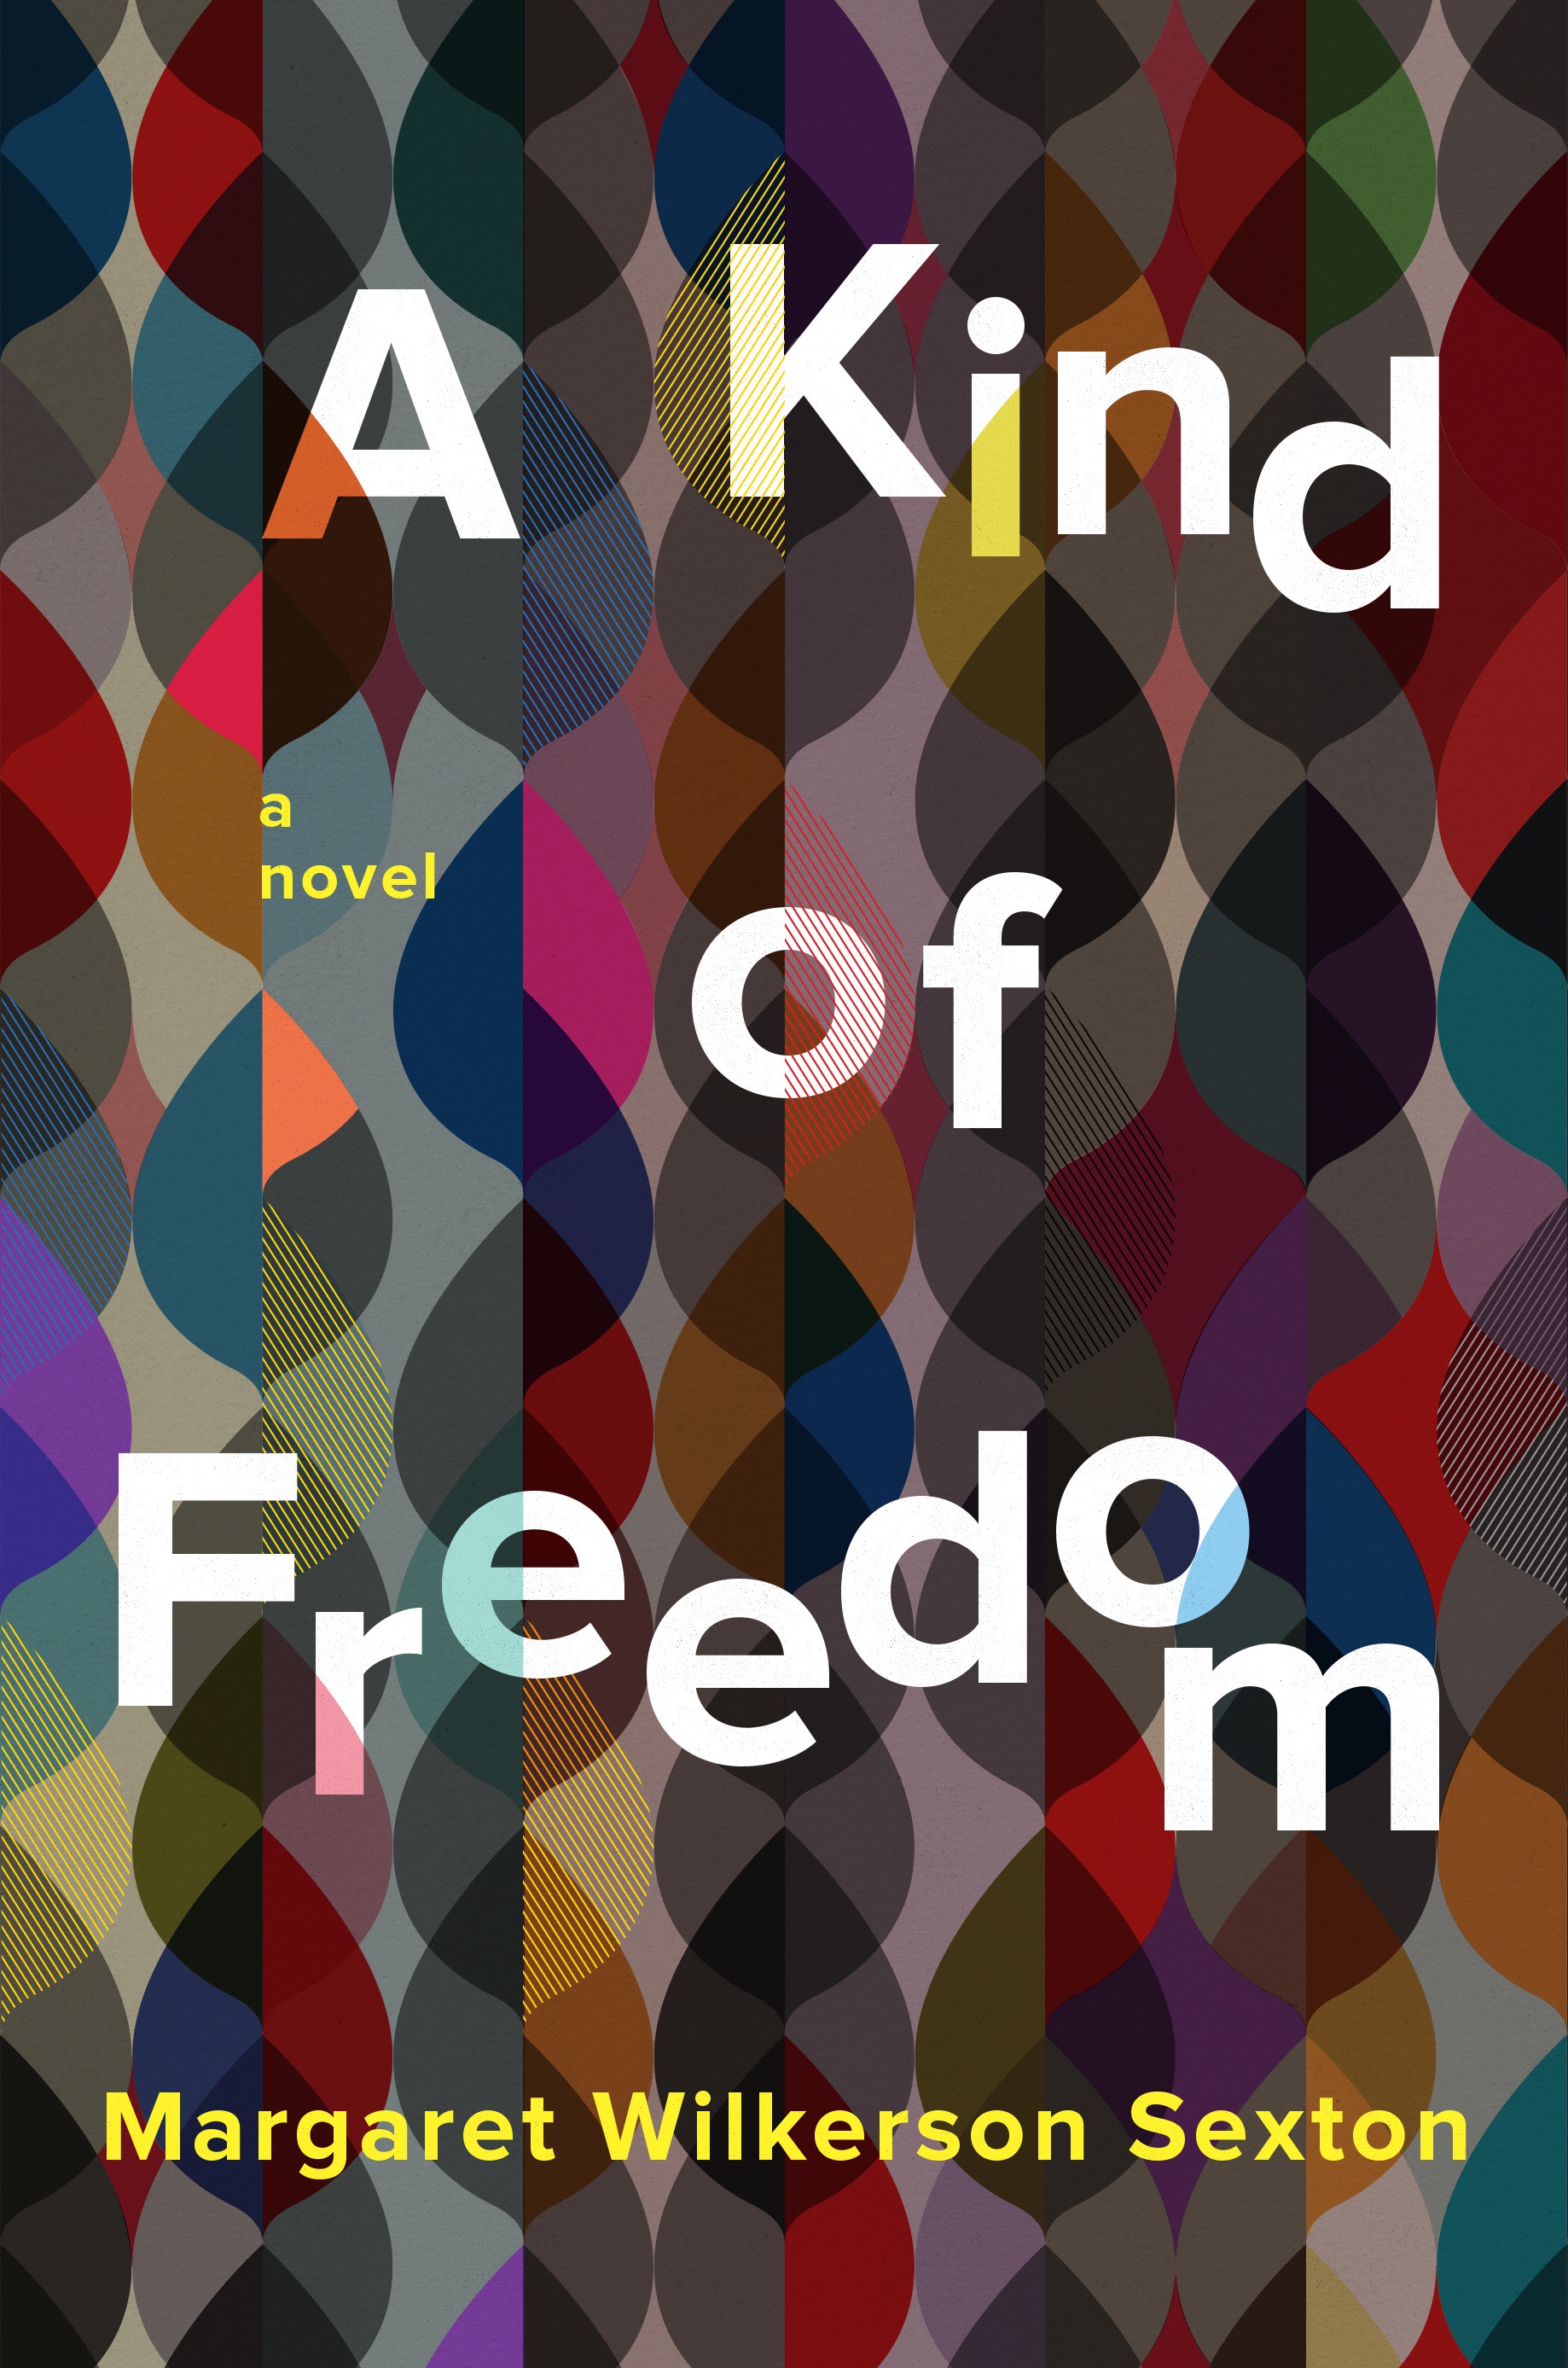 View description for 'A Kind of Freedom'